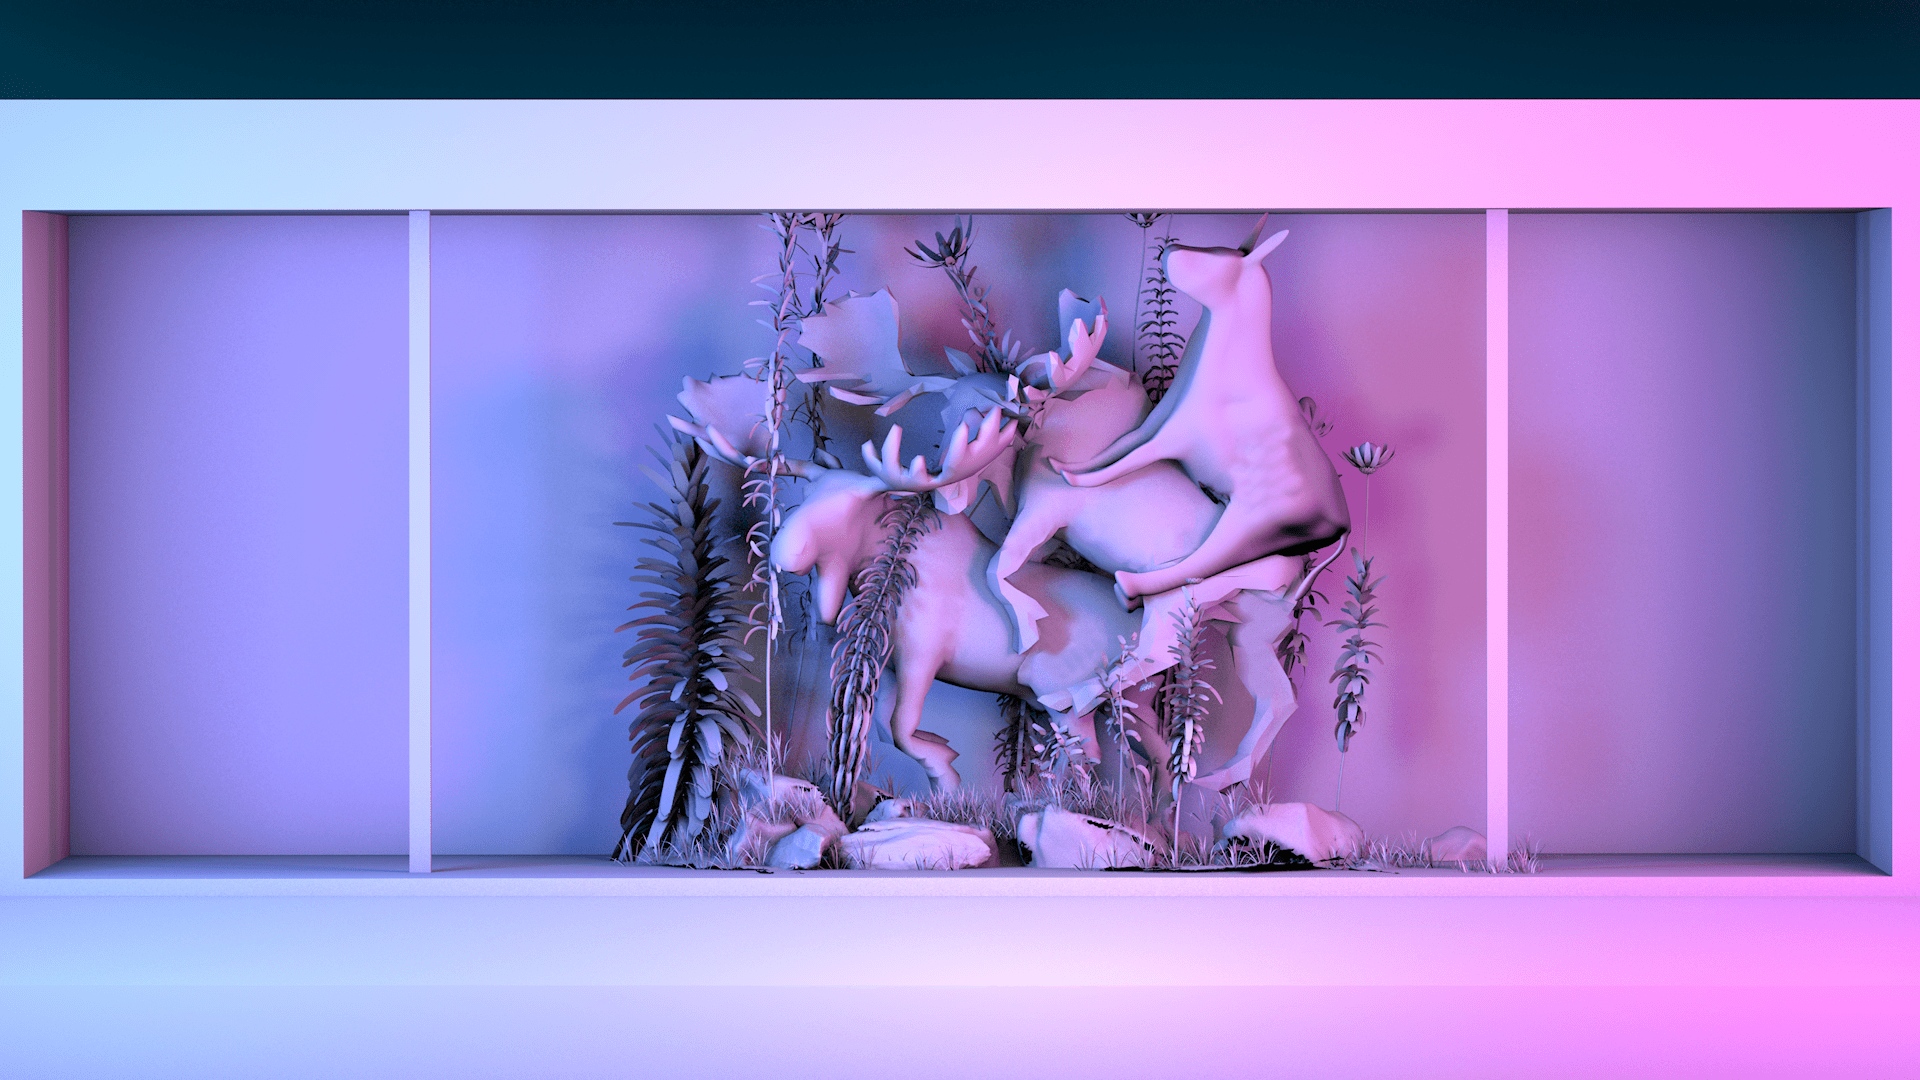 Image of white figures of two moose and possibly a female moose, stacked on top of each other, with sculptured foliage displayed in a rectangular recess and bathed in cold violet and pink light.